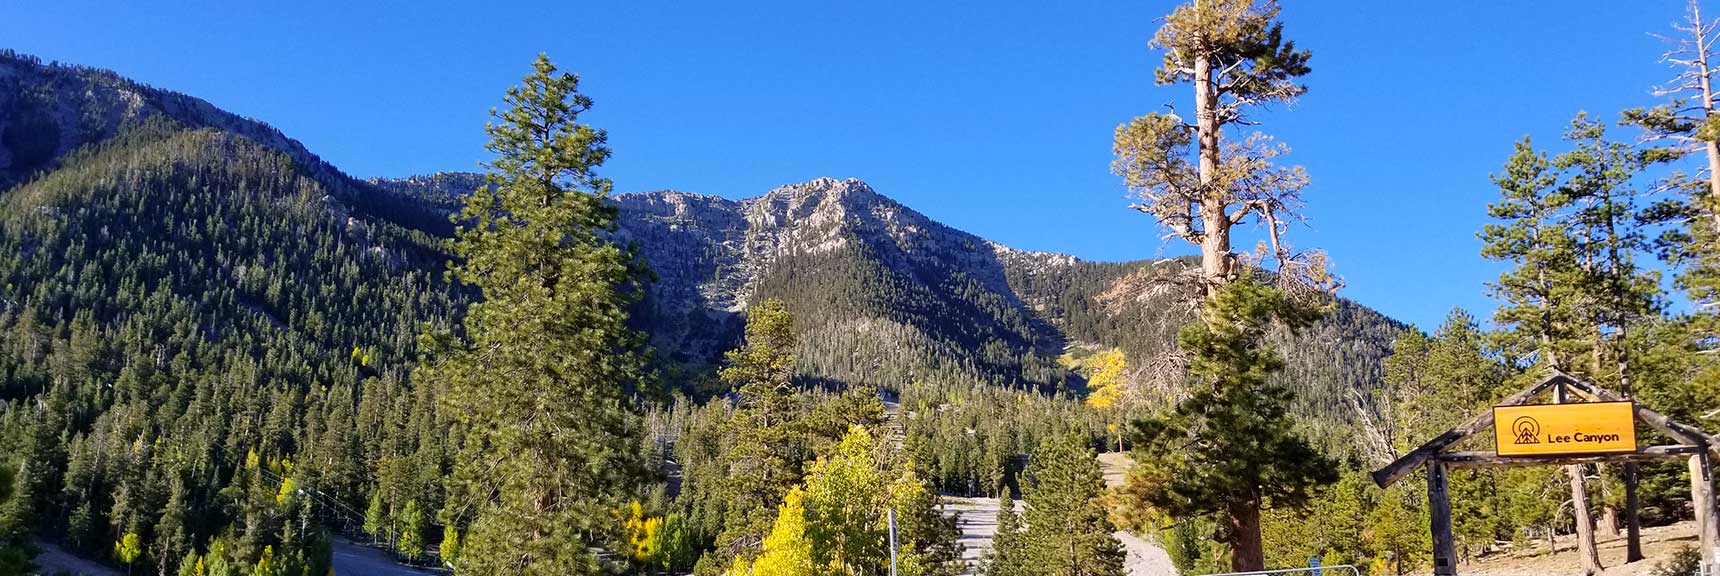 Lee Peak Viewed from Ski Area in Lee Canyon, Nevada